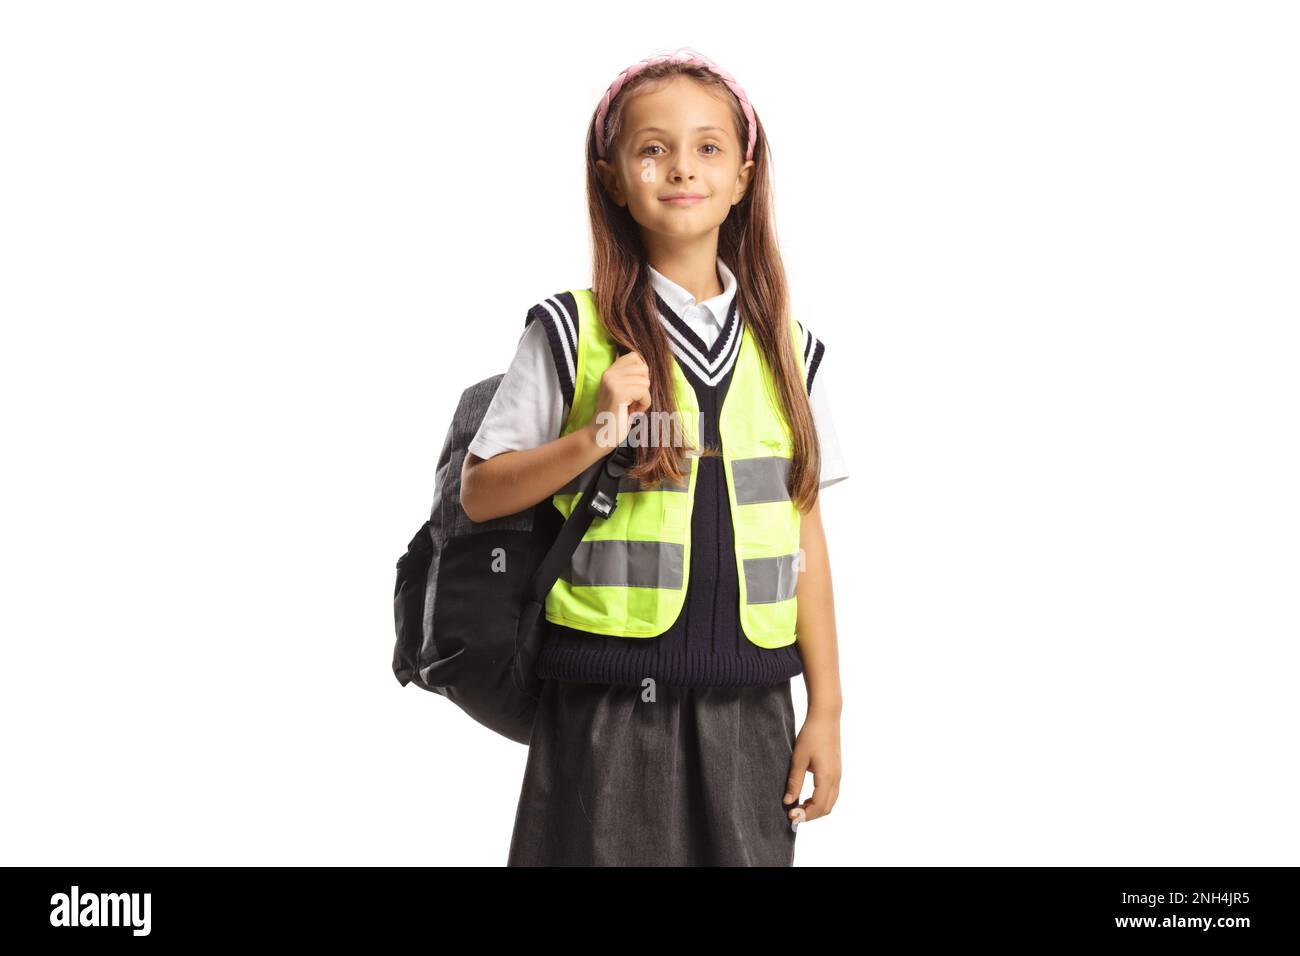 Schoolgirl with a backpack wearing a reflective safety vest isolated on white background Stock Photo